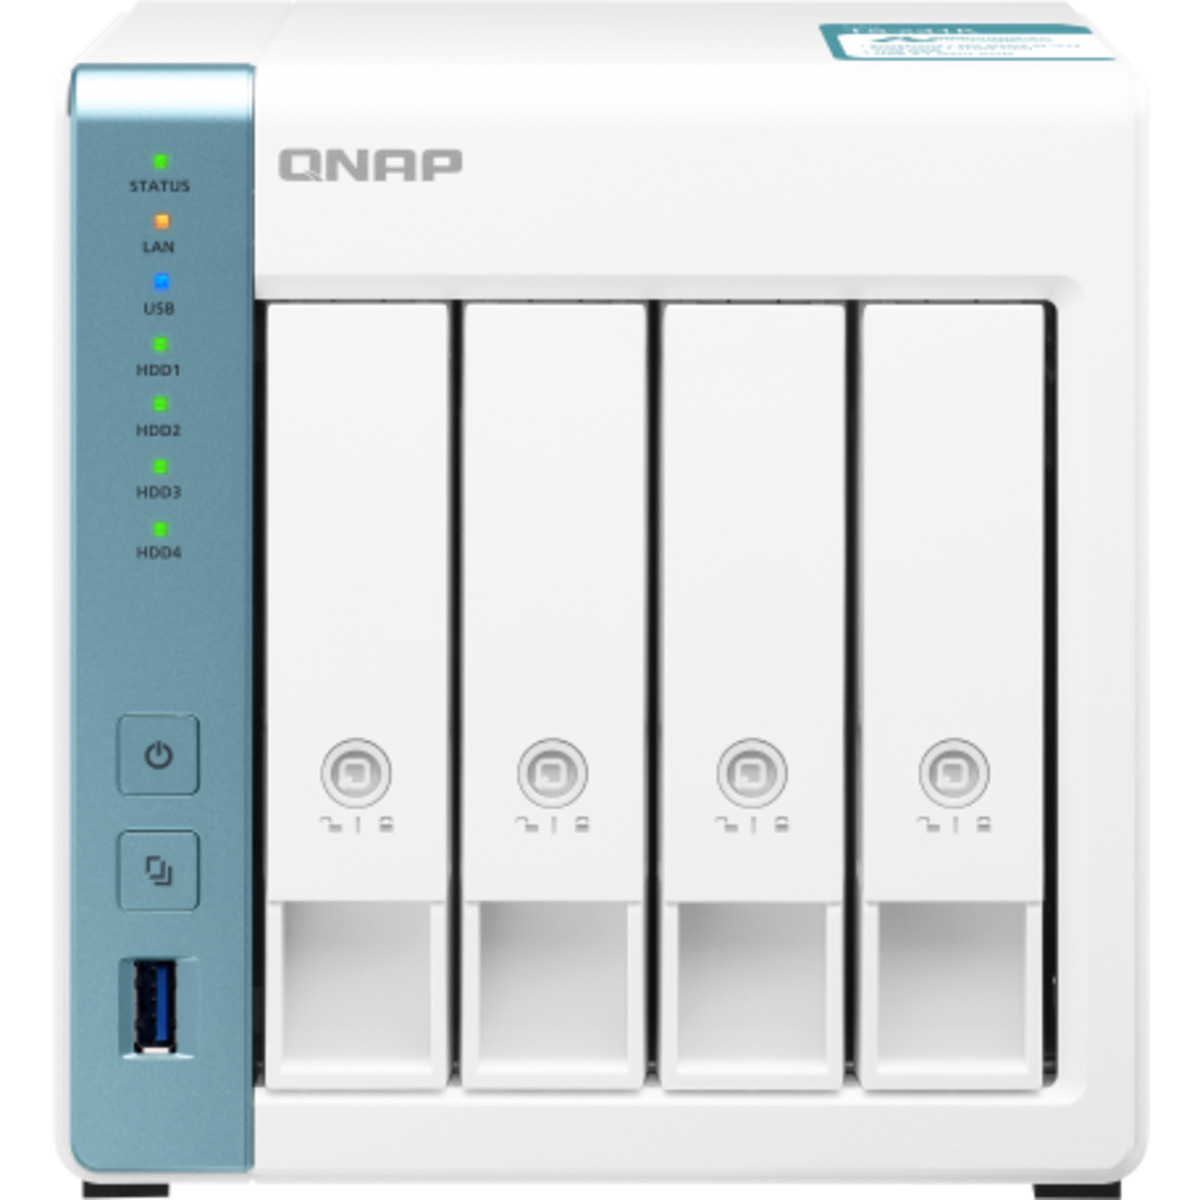 QNAP TS-431K 32tb 4-Bay Desktop Personal / Basic Home / Small Office NAS - Network Attached Storage Device 4x8tb Western Digital Red Plus WD80EFPX 3.5 7200rpm SATA 6Gb/s HDD NAS Class Drives Installed - Burn-In Tested TS-431K